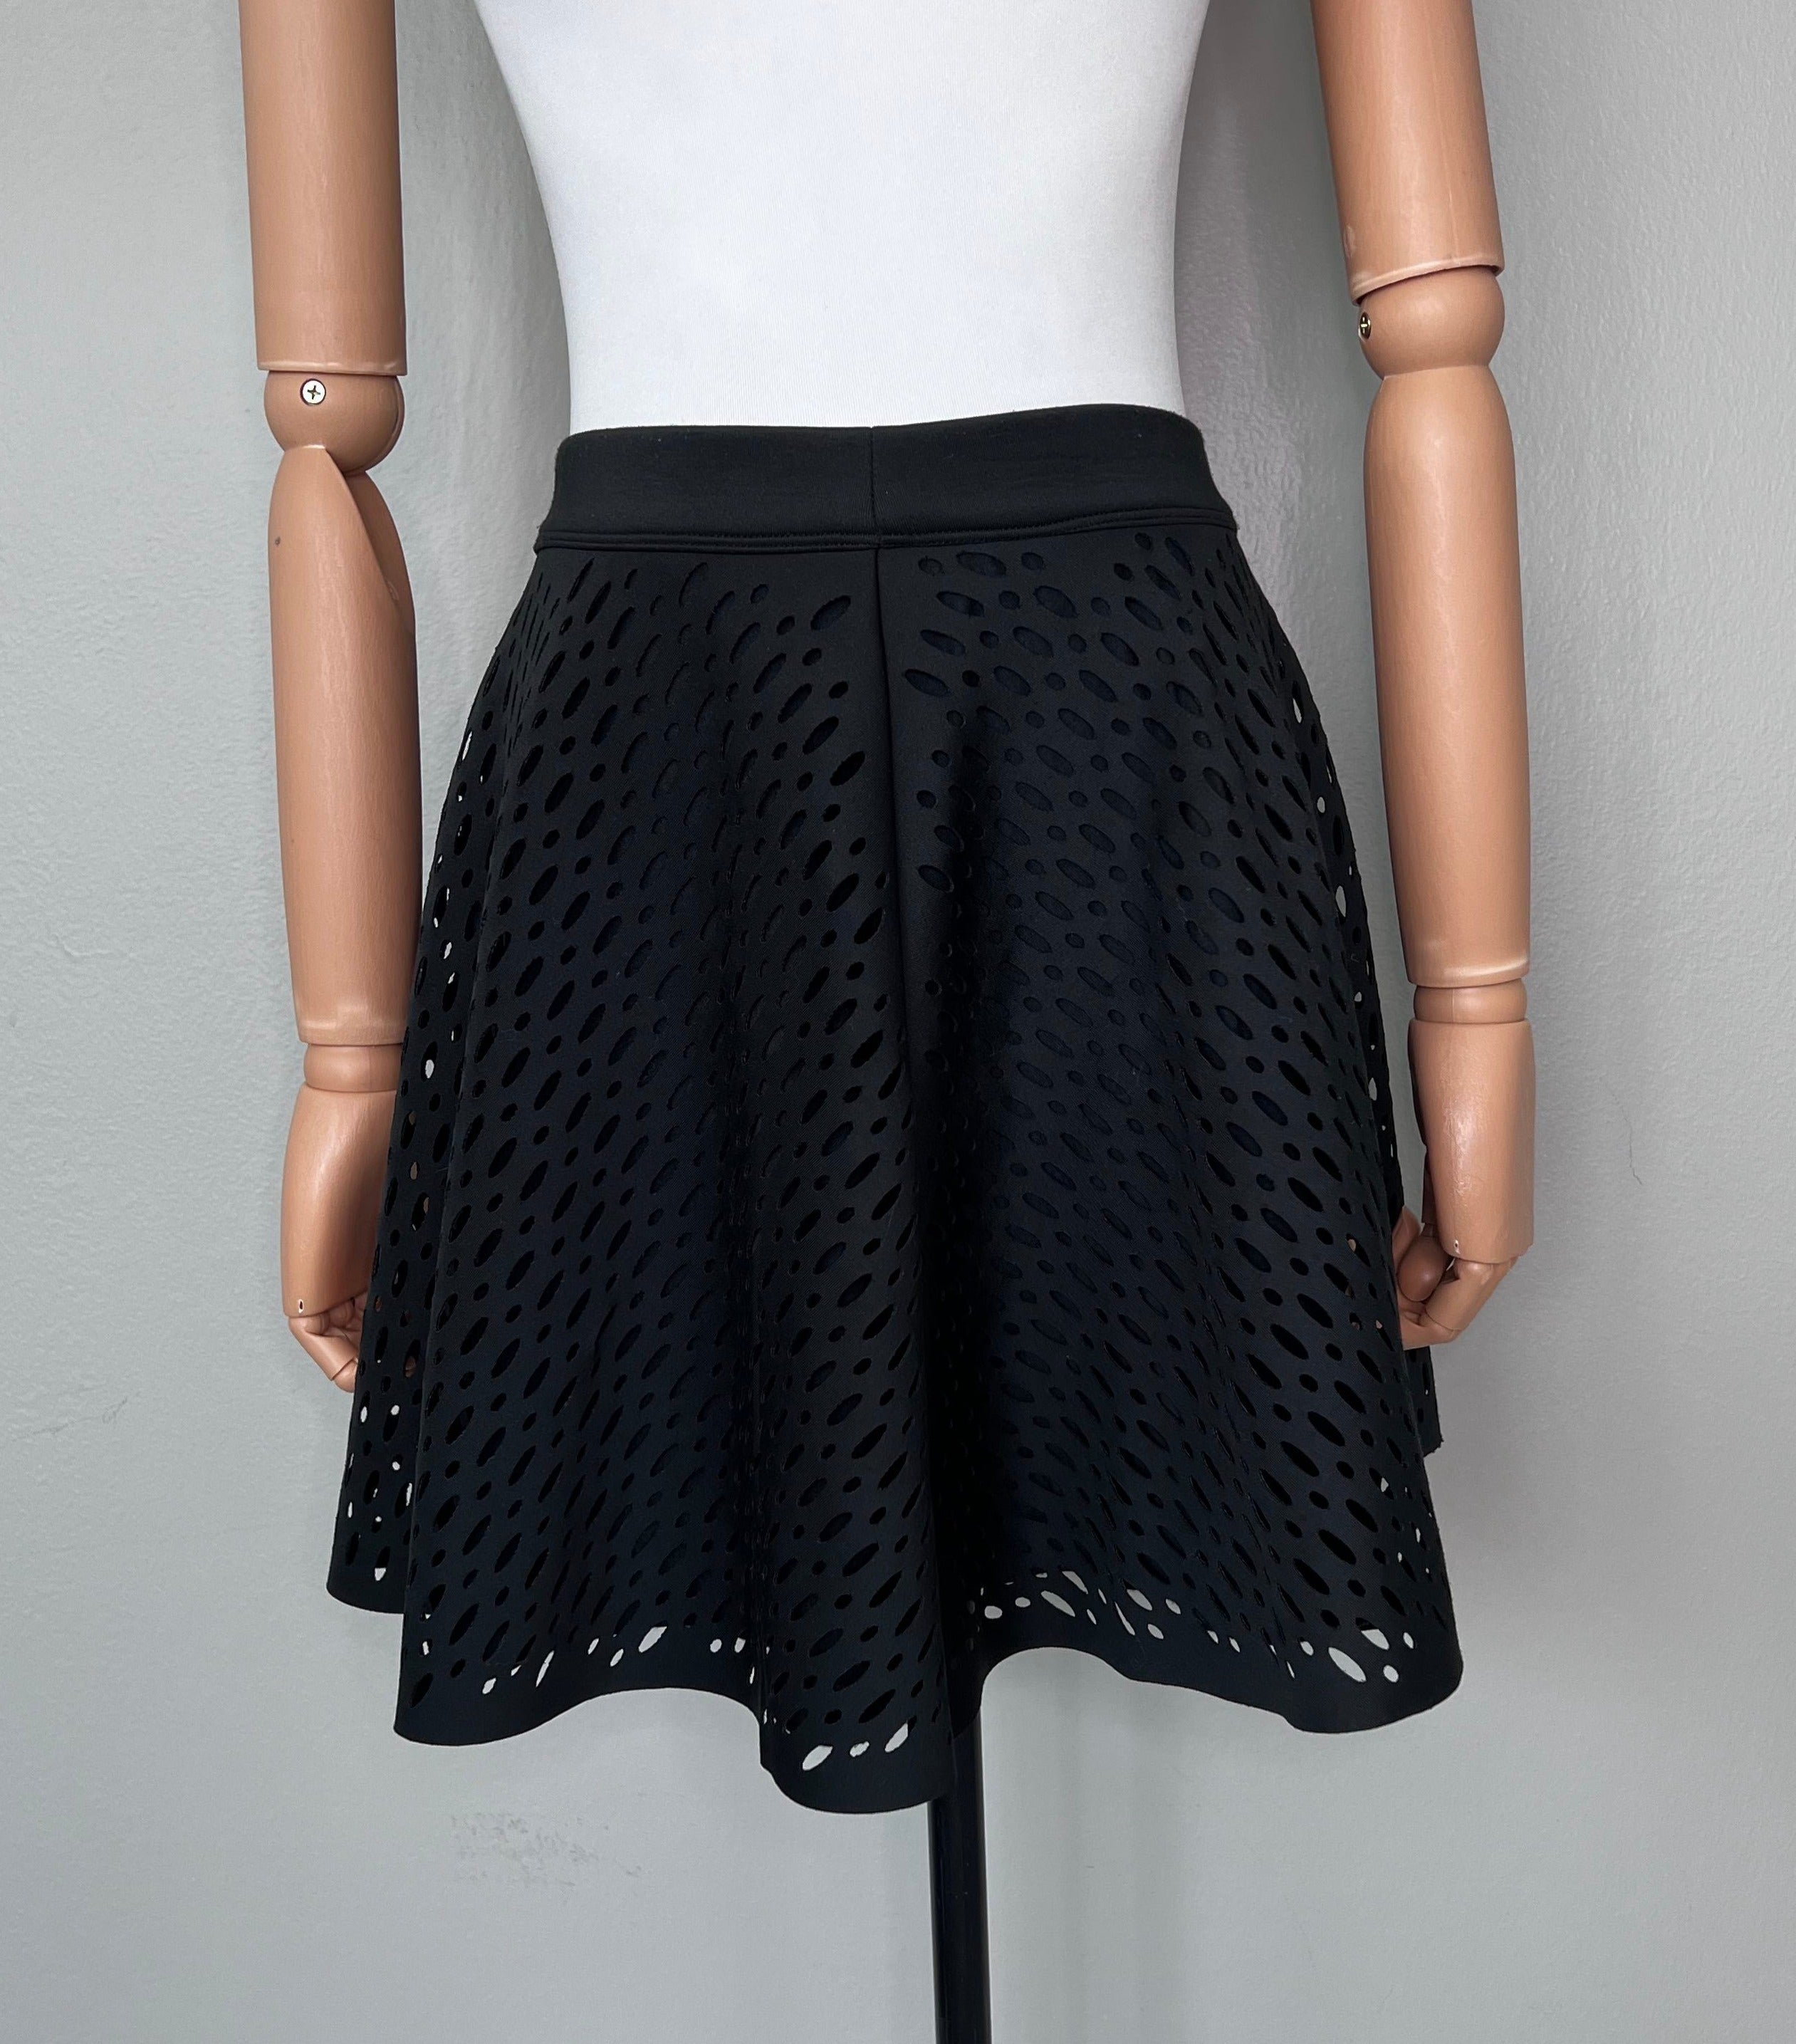 Flowy short black skirt - Abrecrombie&Fitch